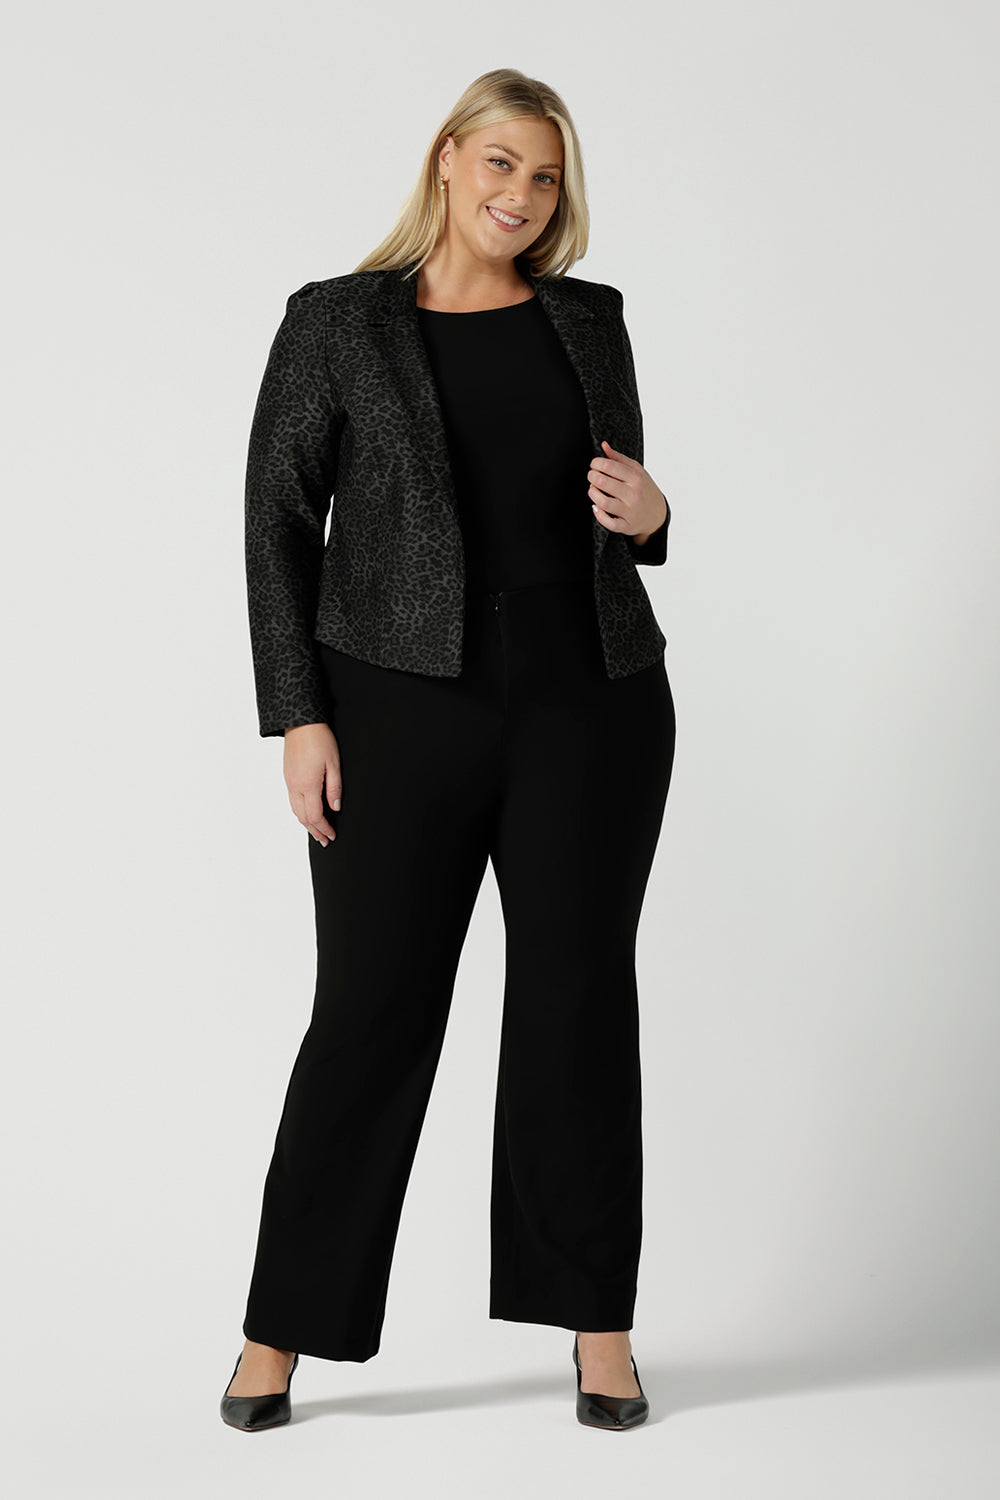 A size 18 woman wearing the Raleigh Jacket in Leopard print. Printed Ponti tailored jacket that is easy care and has a matching pant. Comfortable and easy care. Made in Australia for women size 8 - 24.